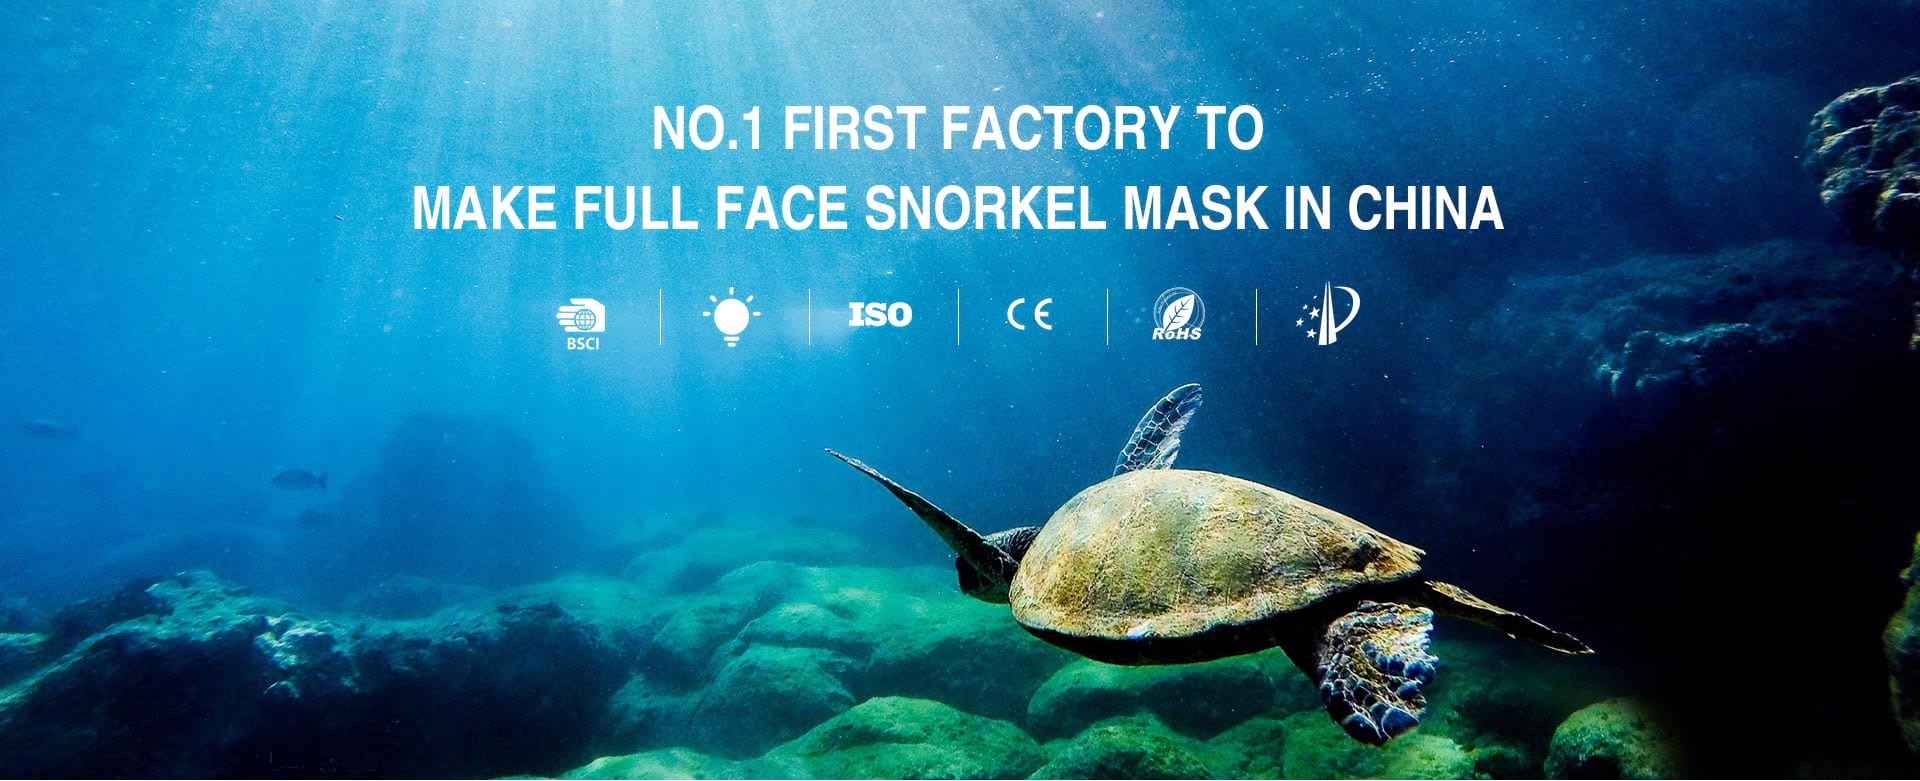 NO. 1 First Factory to make Full Face Snorkel Mask in China